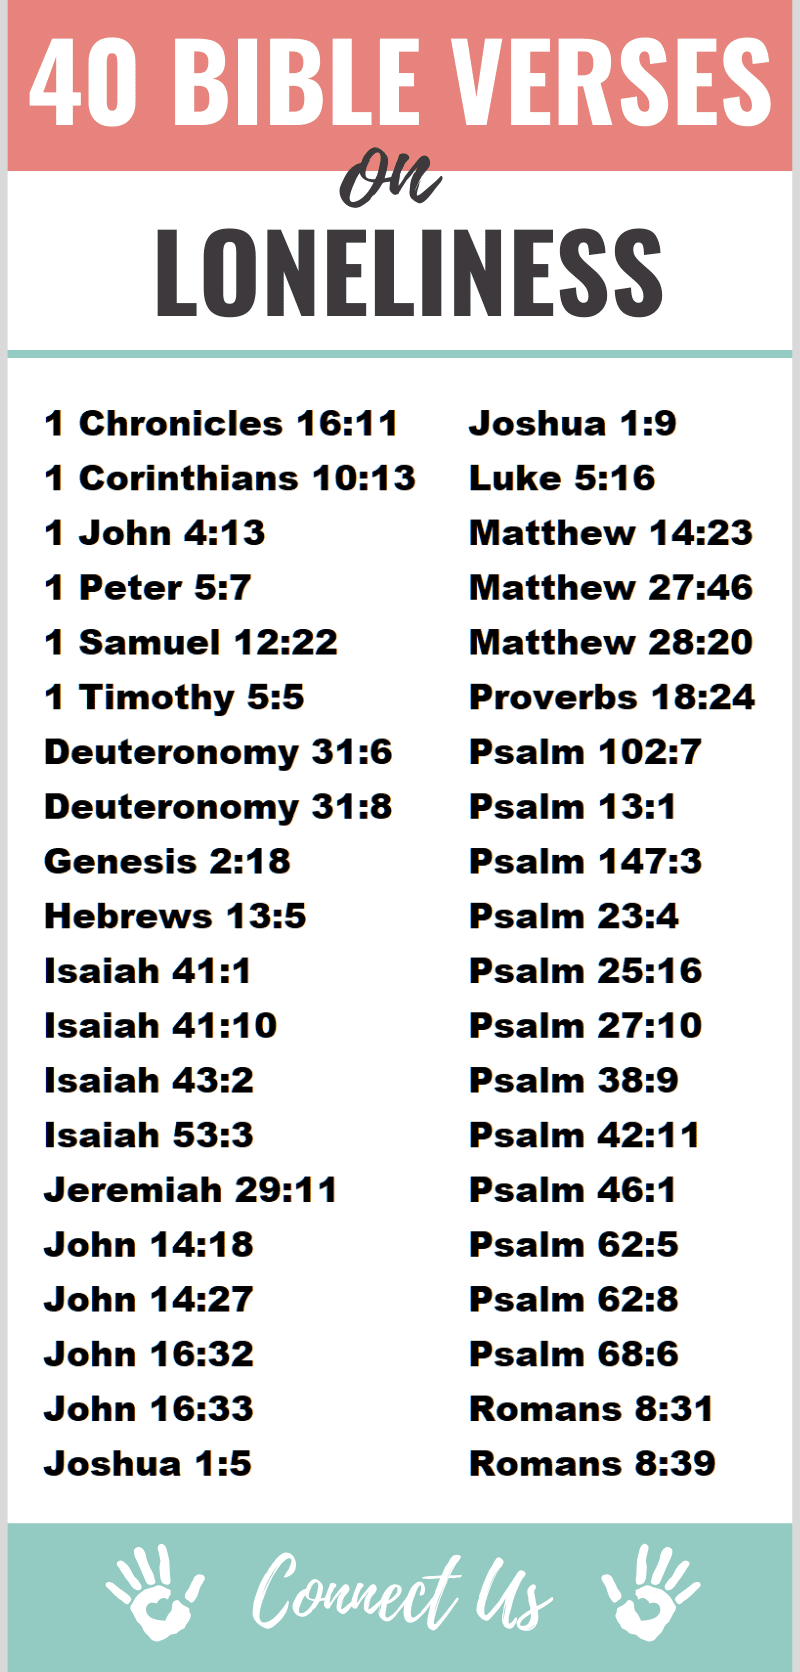 Bible Verses on Loneliness